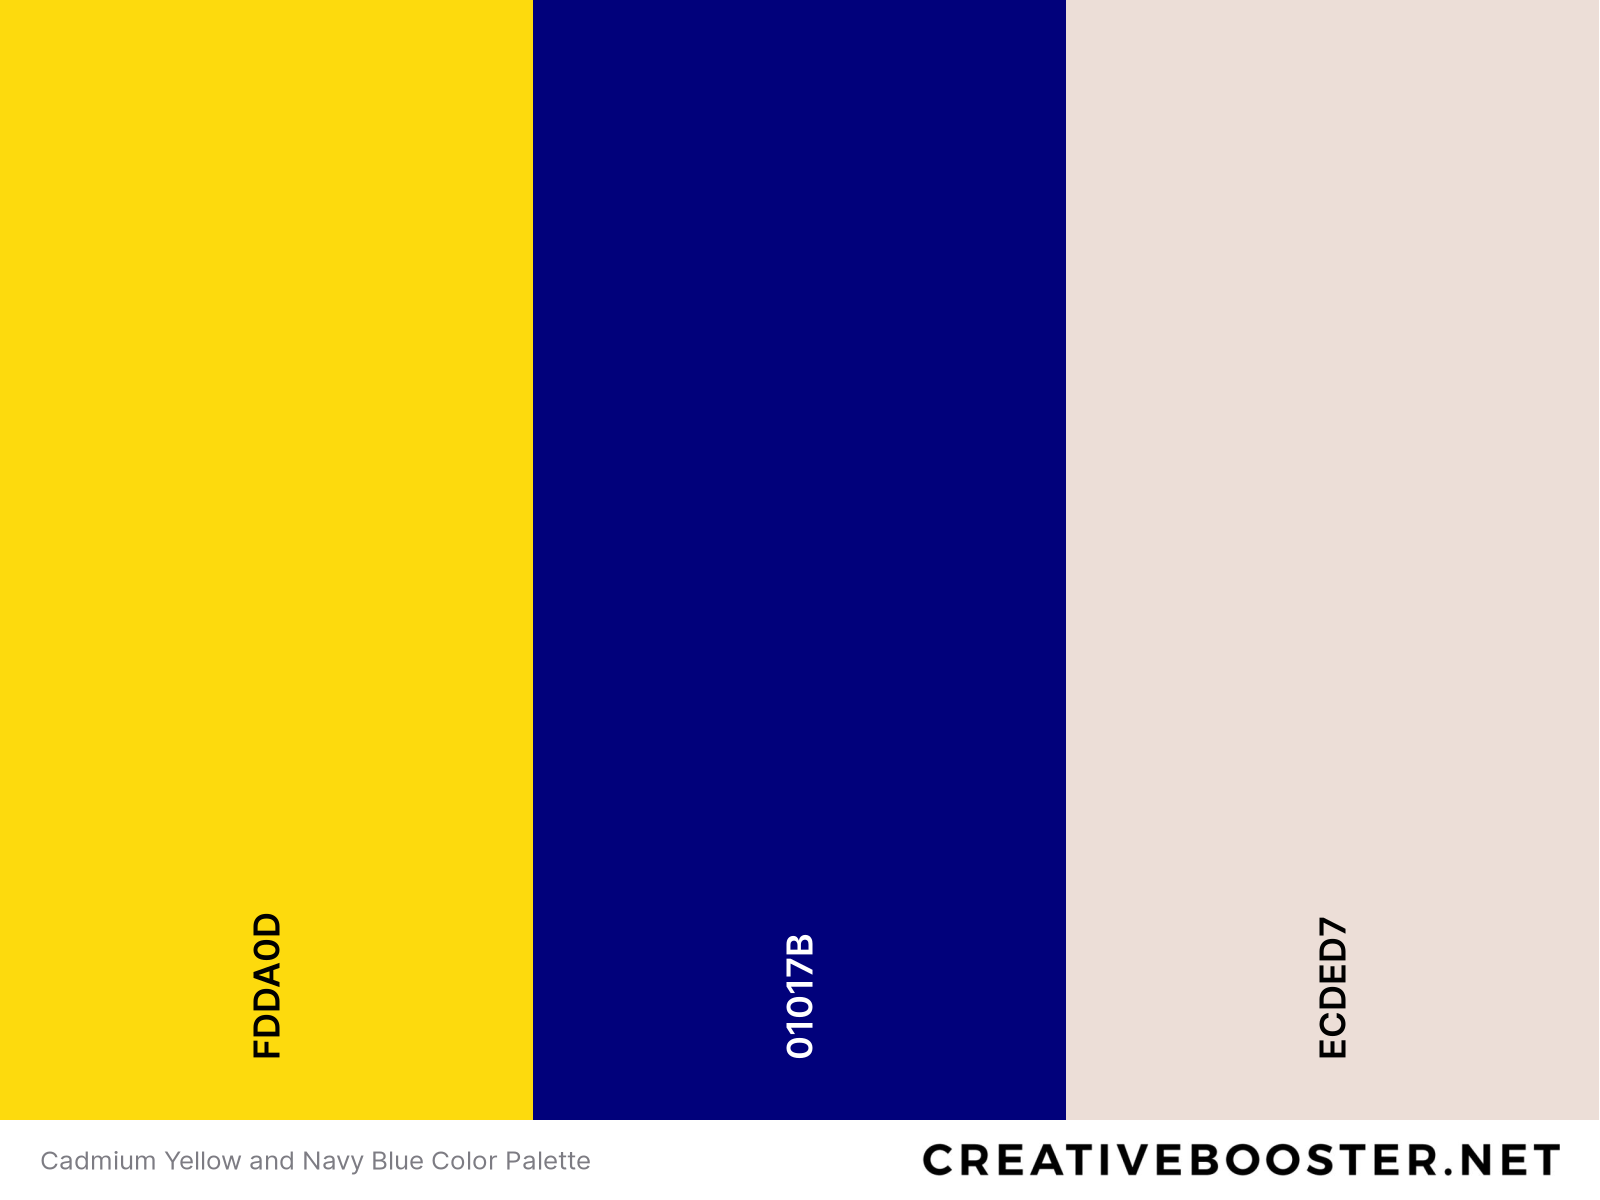 Cadmium Yellow and Navy Blue Color Palette